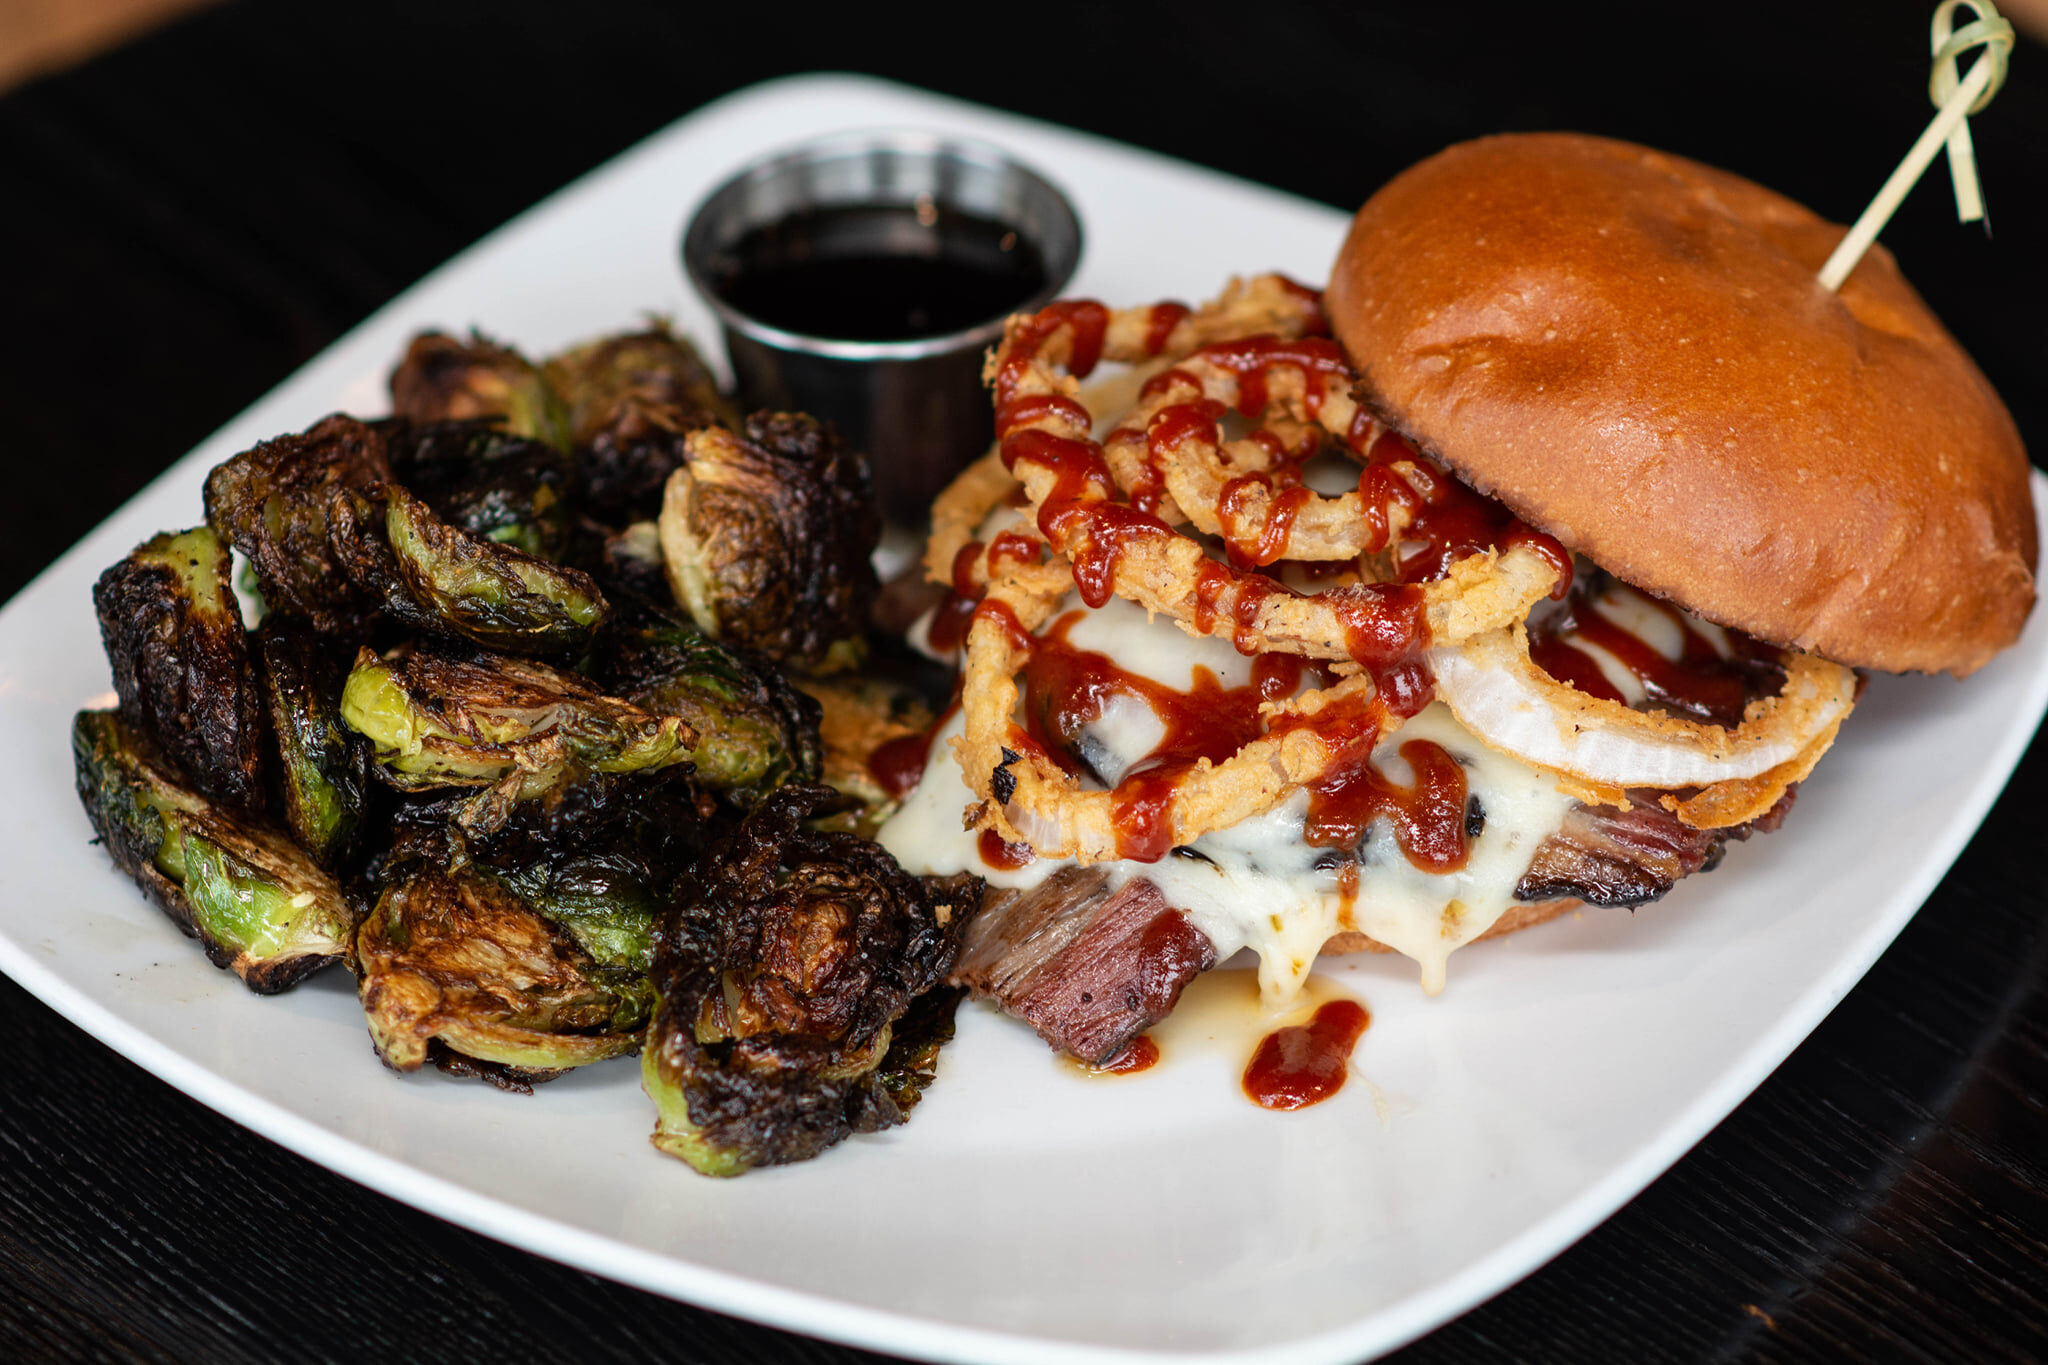 Brisket sandwich with a side of Brussels sprouts from Ramsey's Trailside along the Lewis and Clark Historic Trail